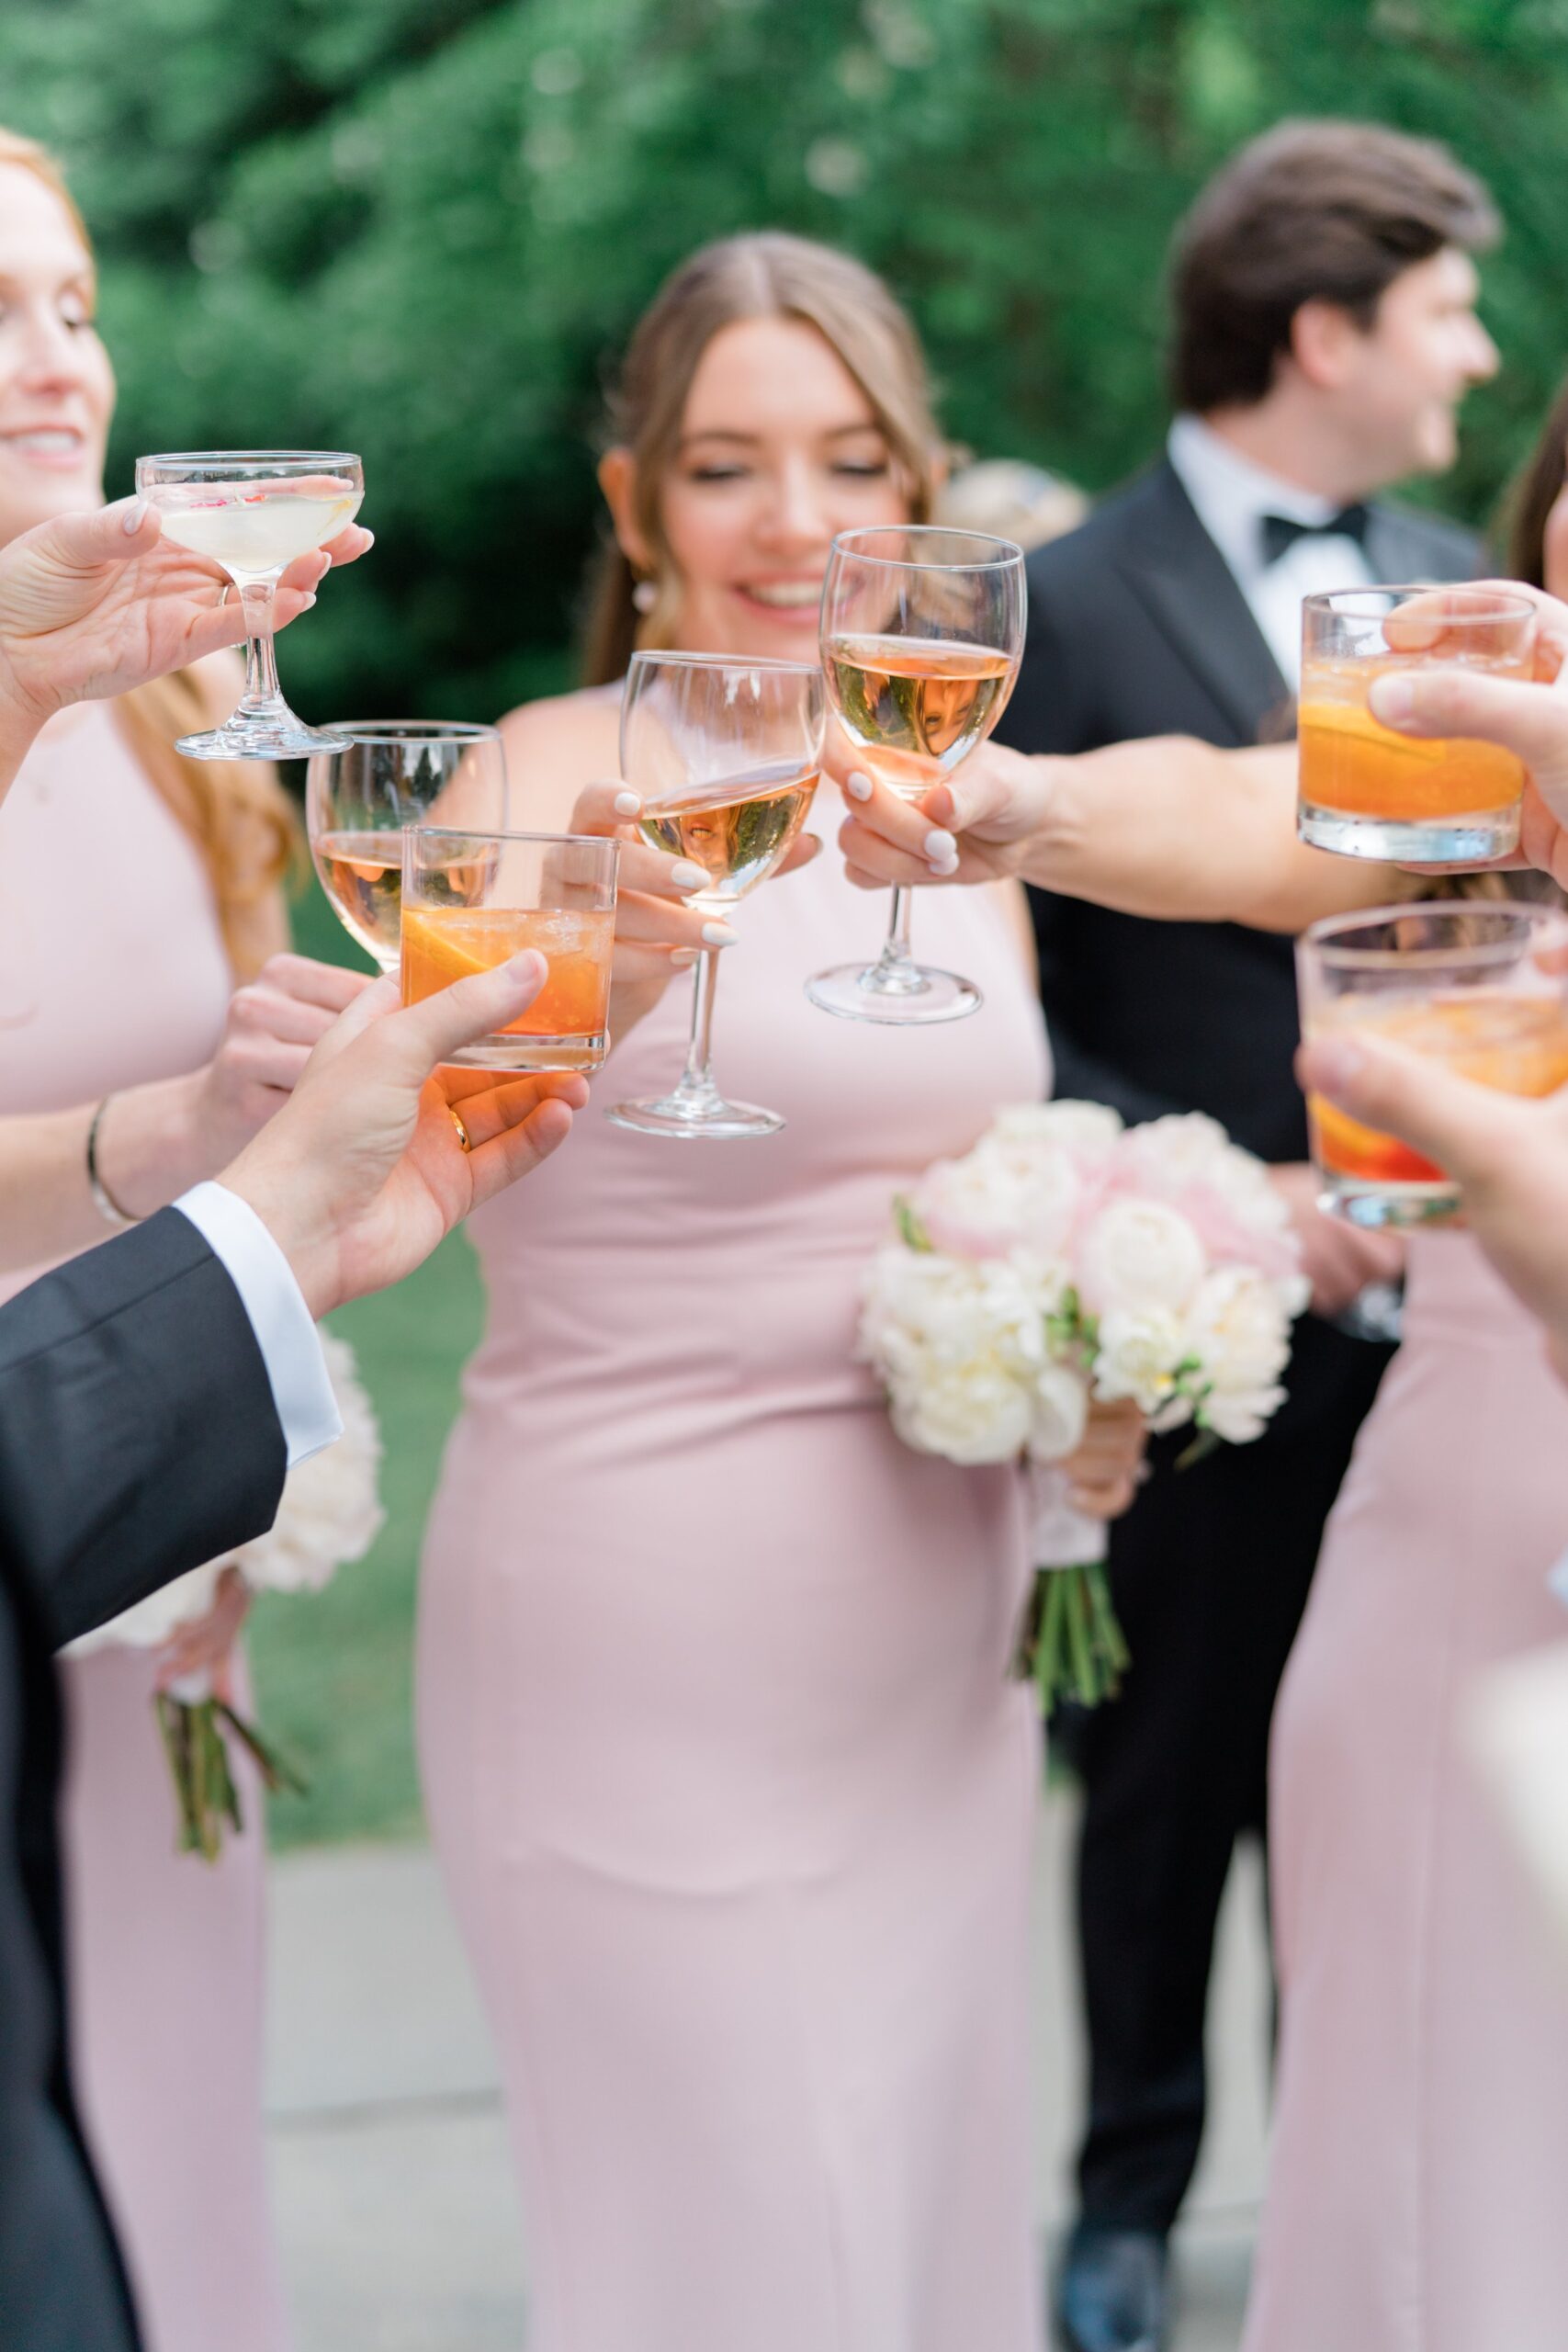 Bridal party toast at the start of cocktail hour.